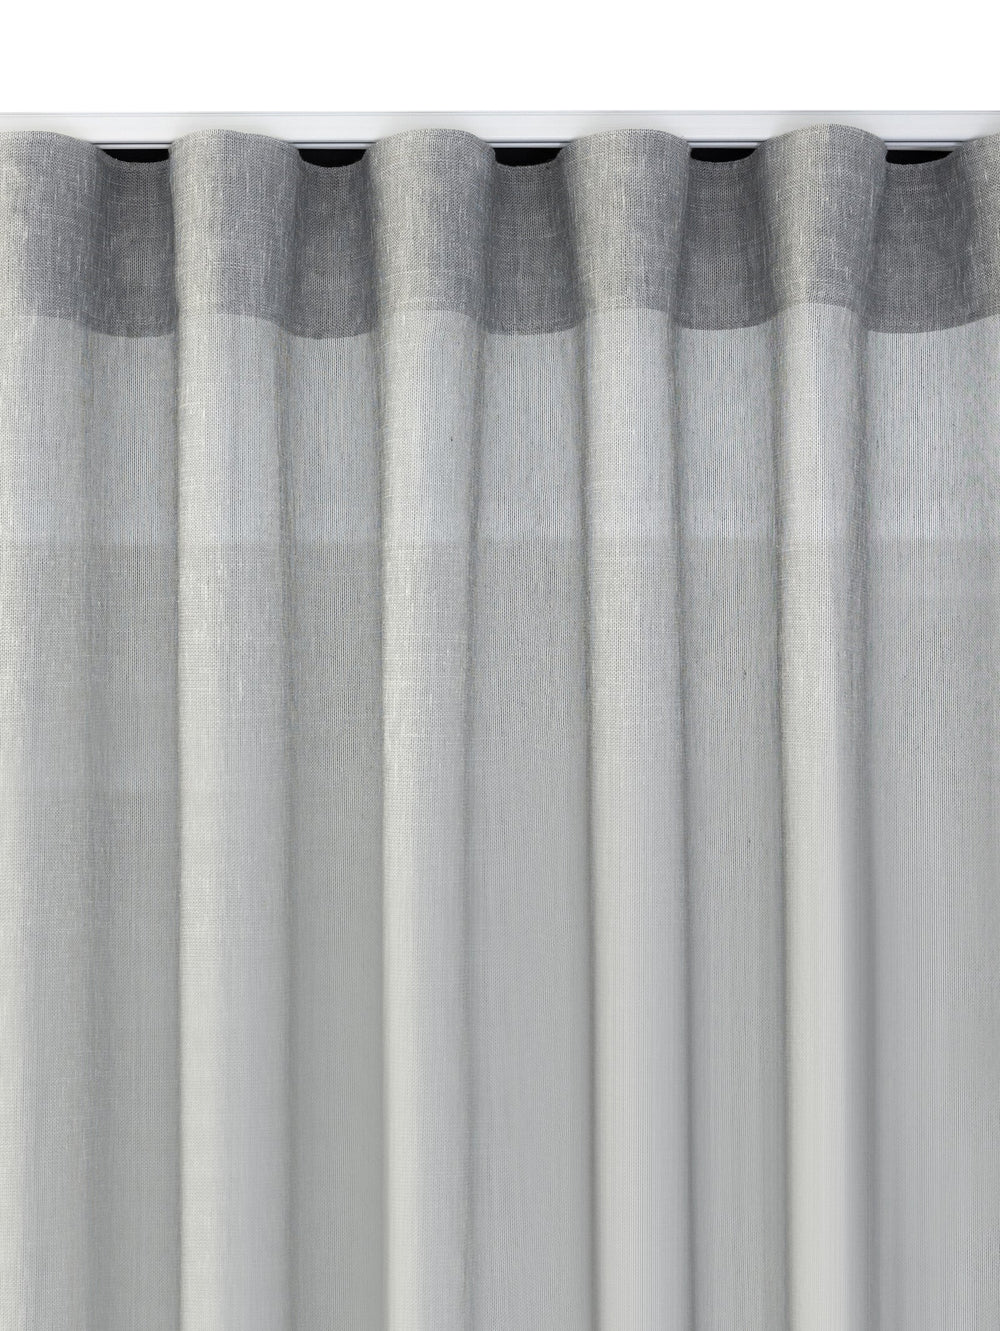 St. Tropez Unlined Ready-Made Curtains - Curtains & Drapes- Hertex Haus Online - Curtains